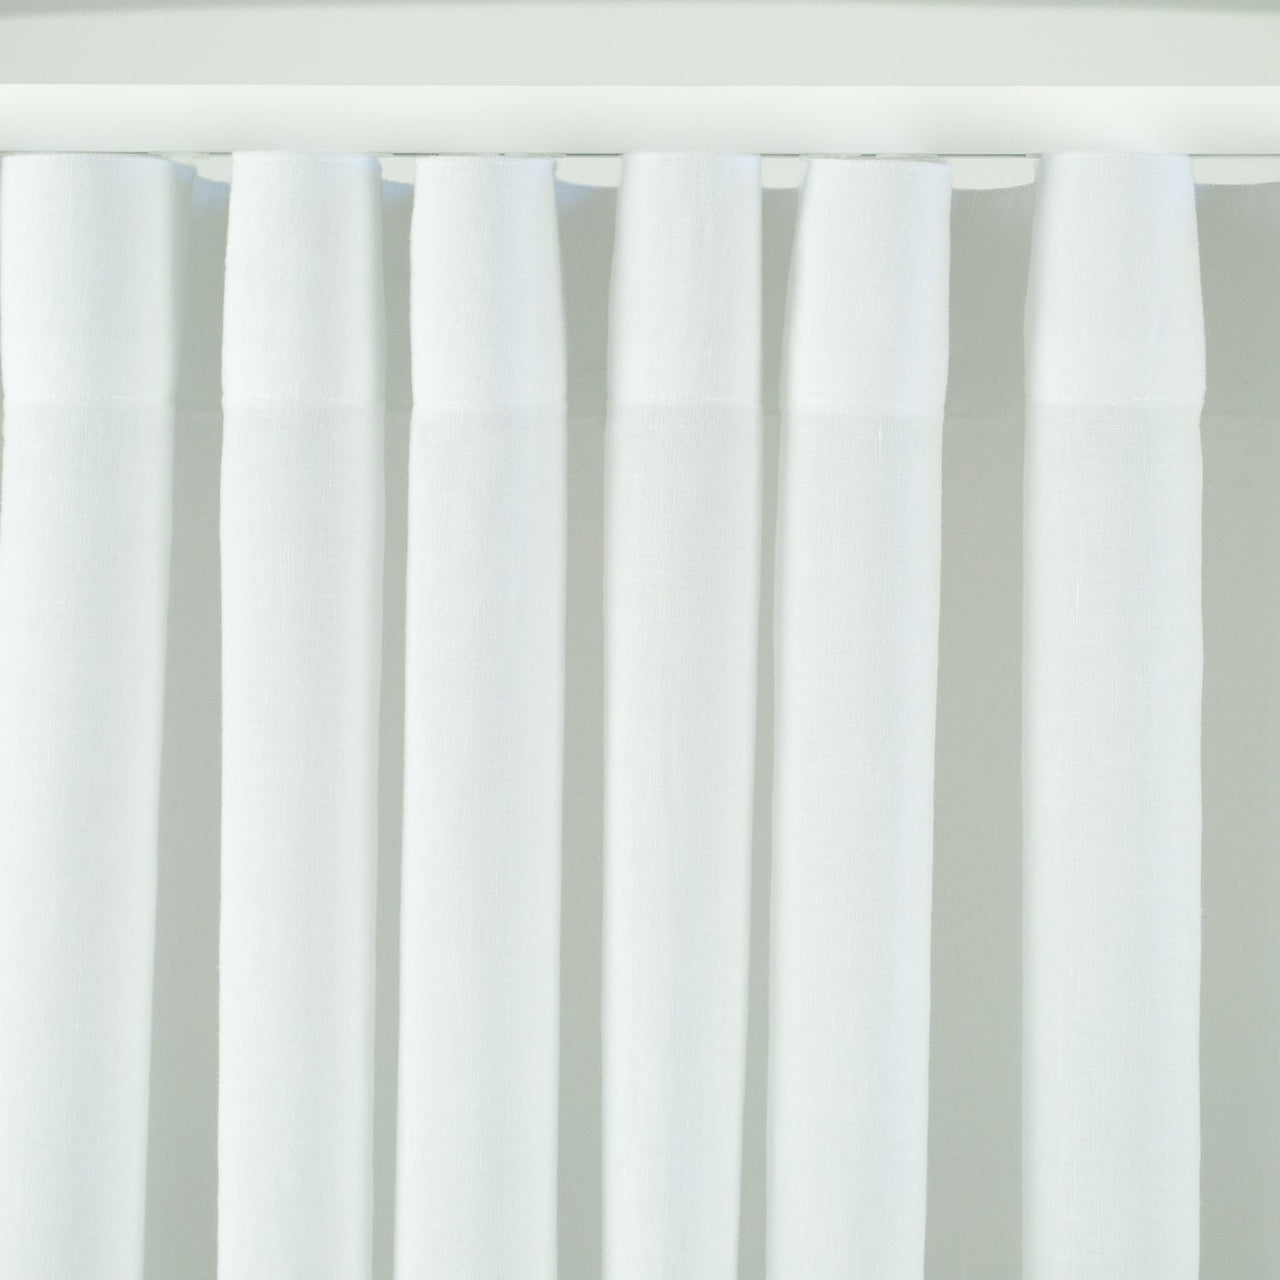 Linen Curtain for Wavefold Track System with Cotton Lining